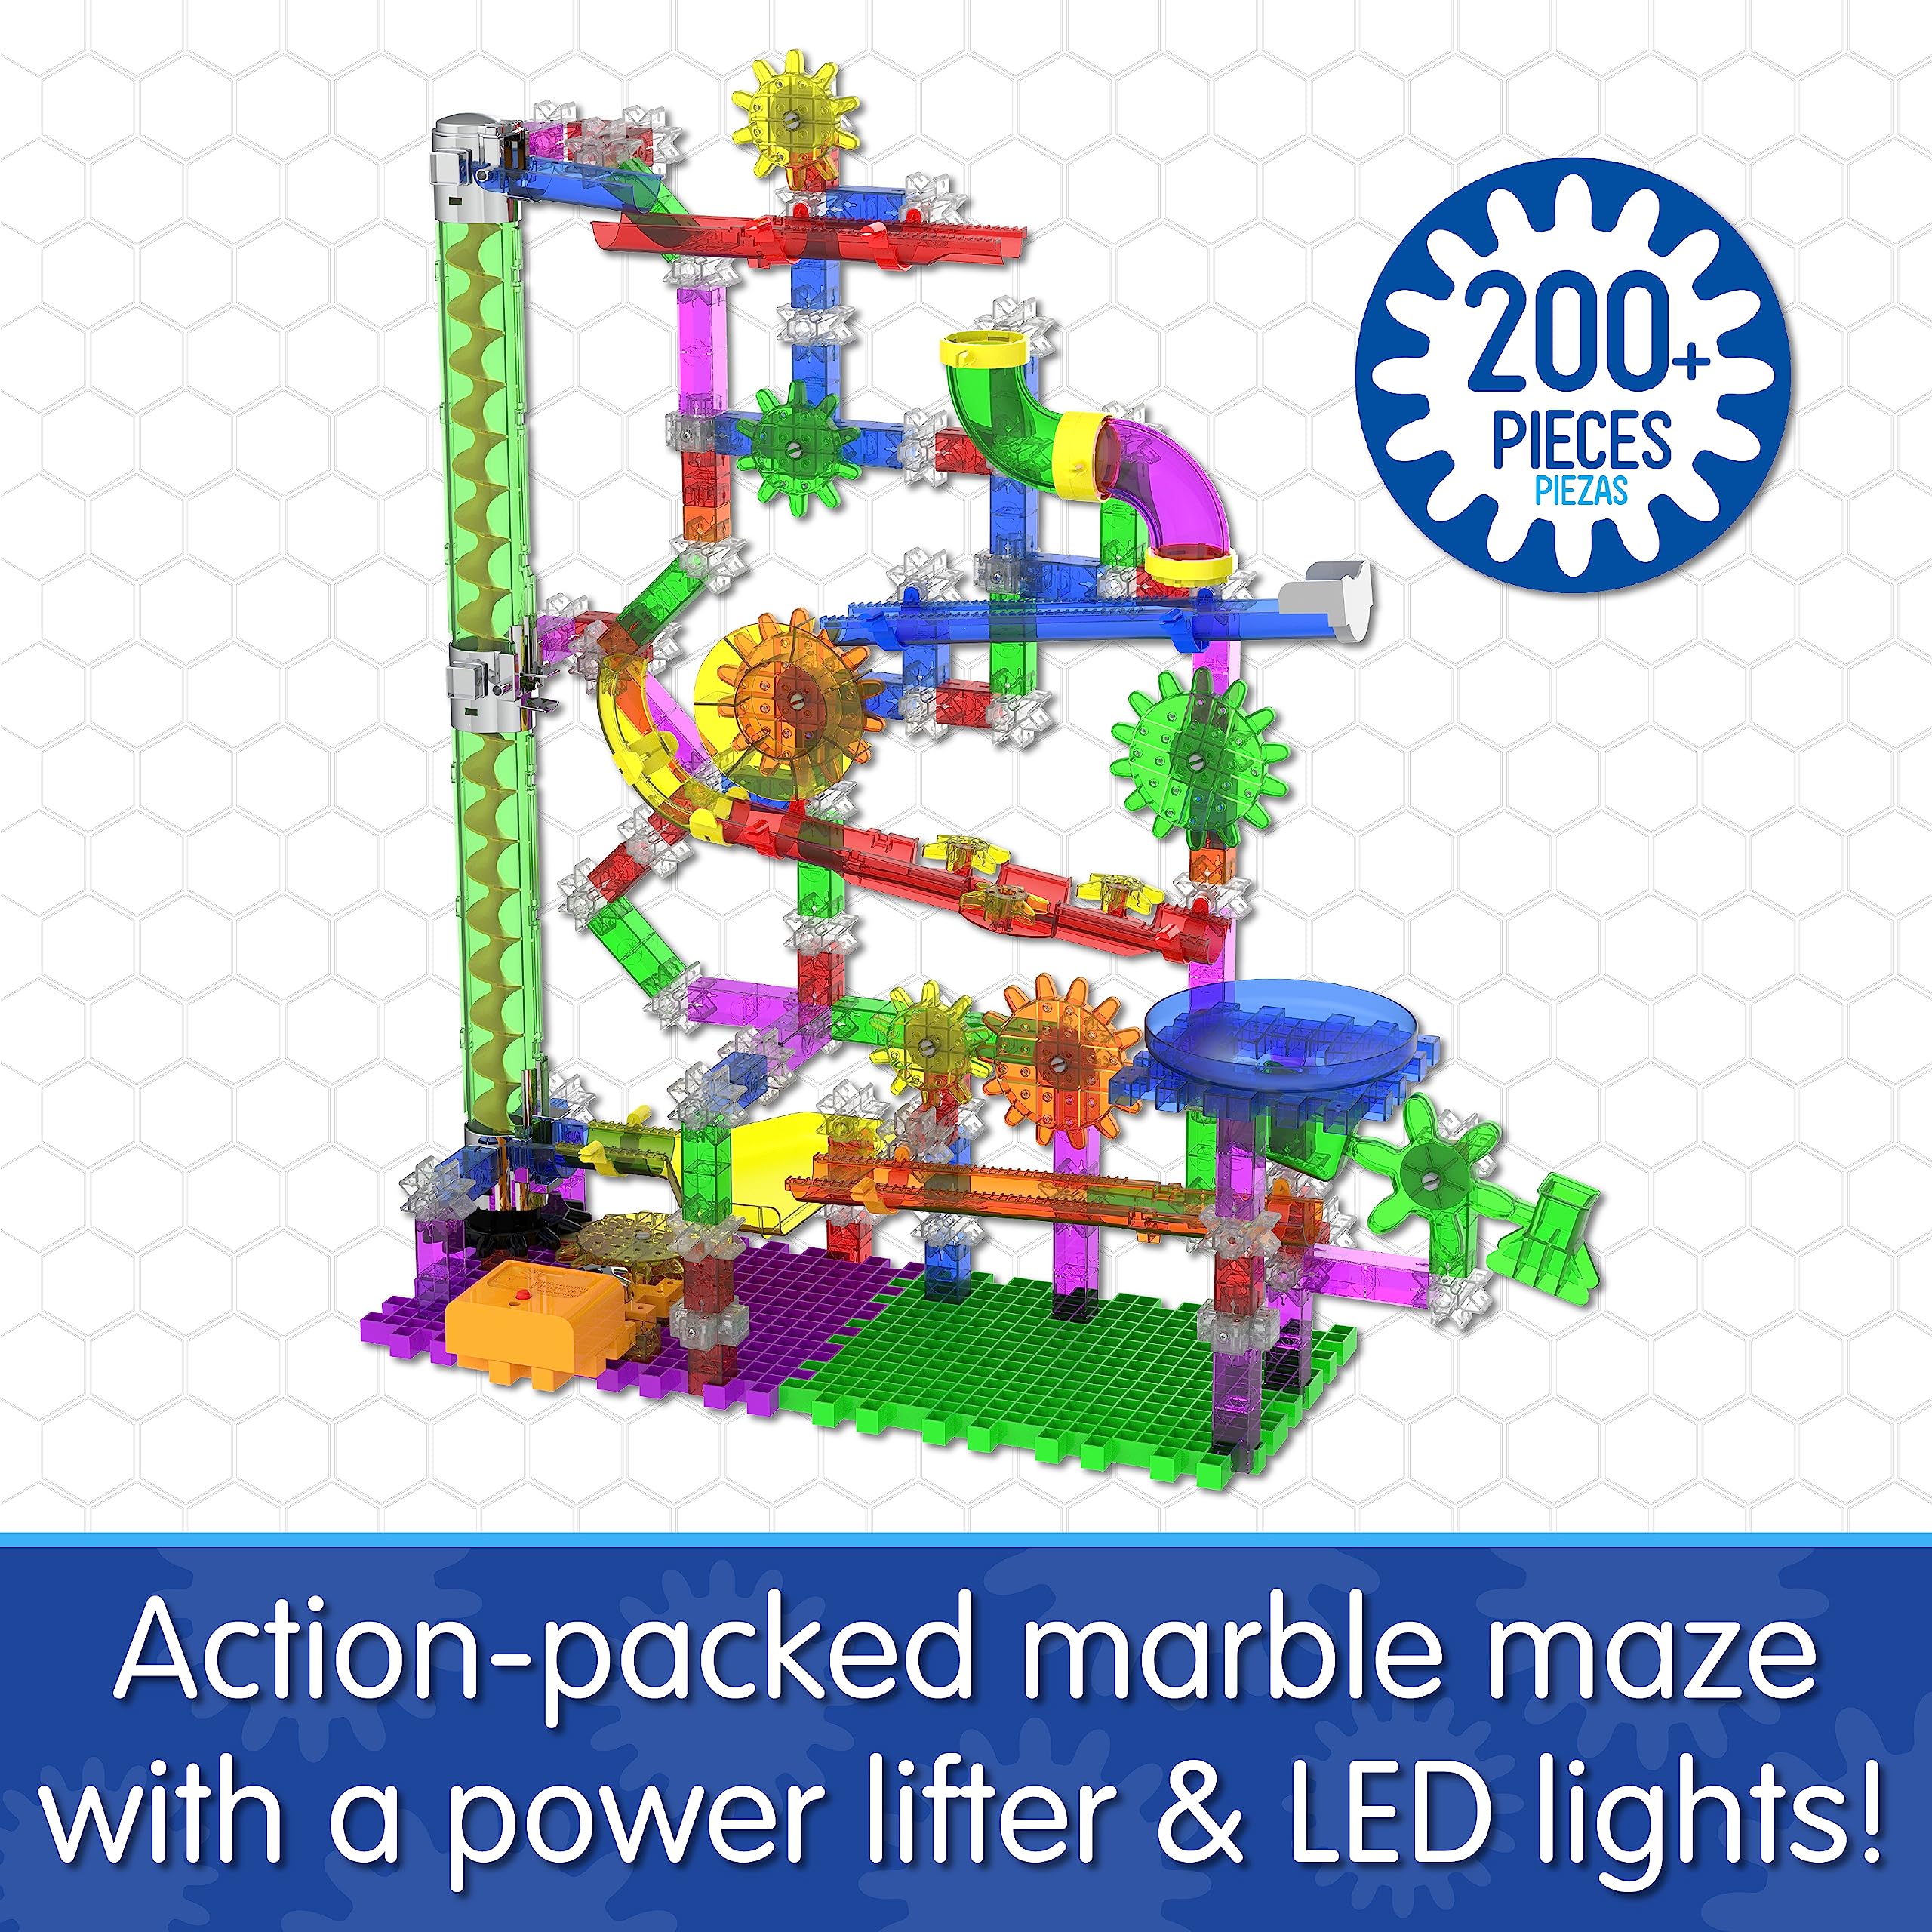 The Learning Journey: Techno Gears Marble Mania - Extreme Glo (200+ pcs) - Glow in The Dark Marble Run for Kids Ages 6 and Up - Award Winning Toys